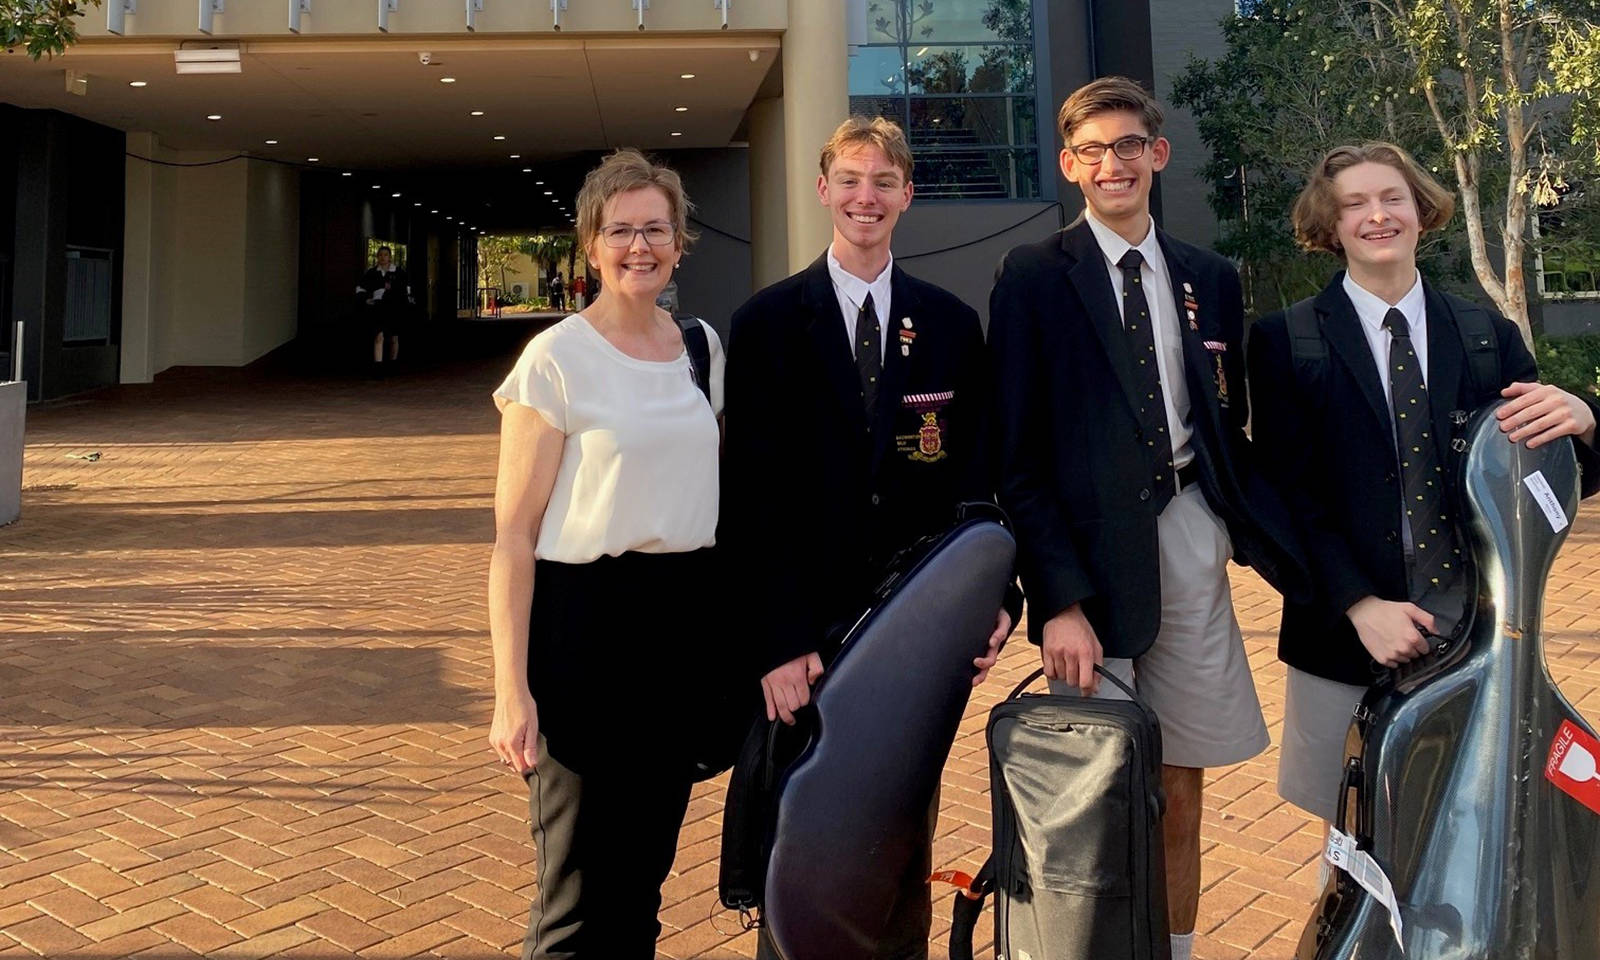 Students who performed at PLC Sydney